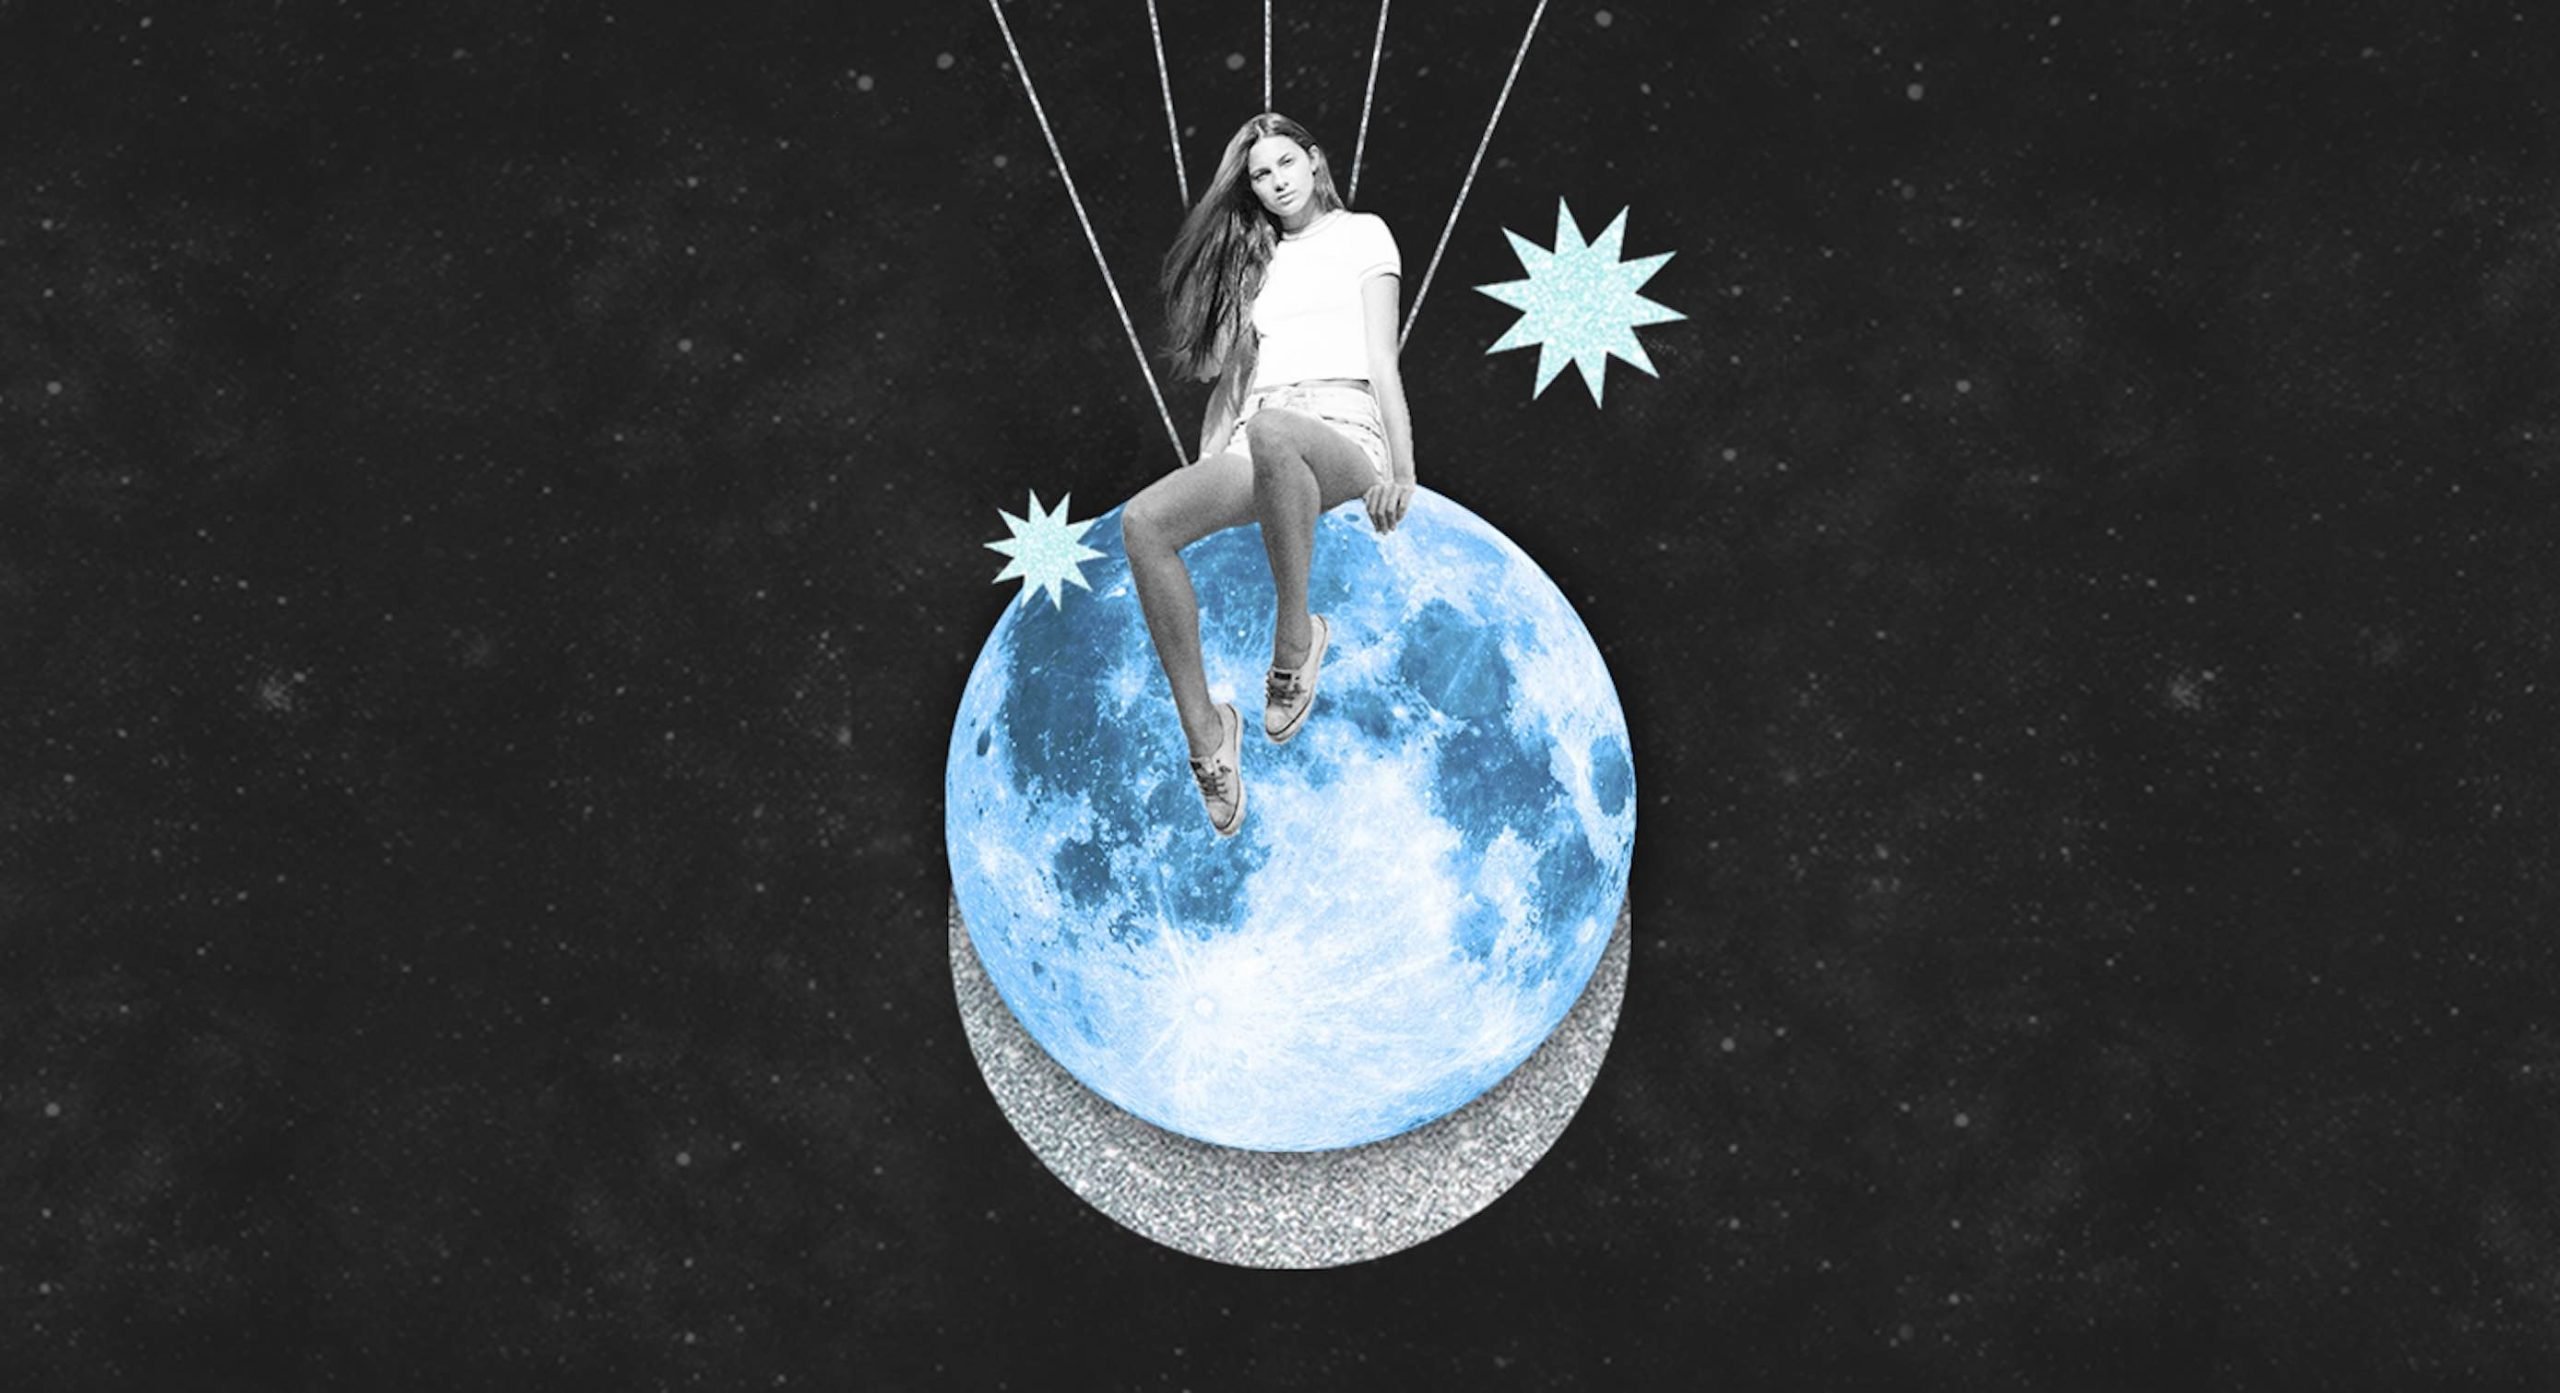 Life Is a Dream Under the September Pisces Full Moon